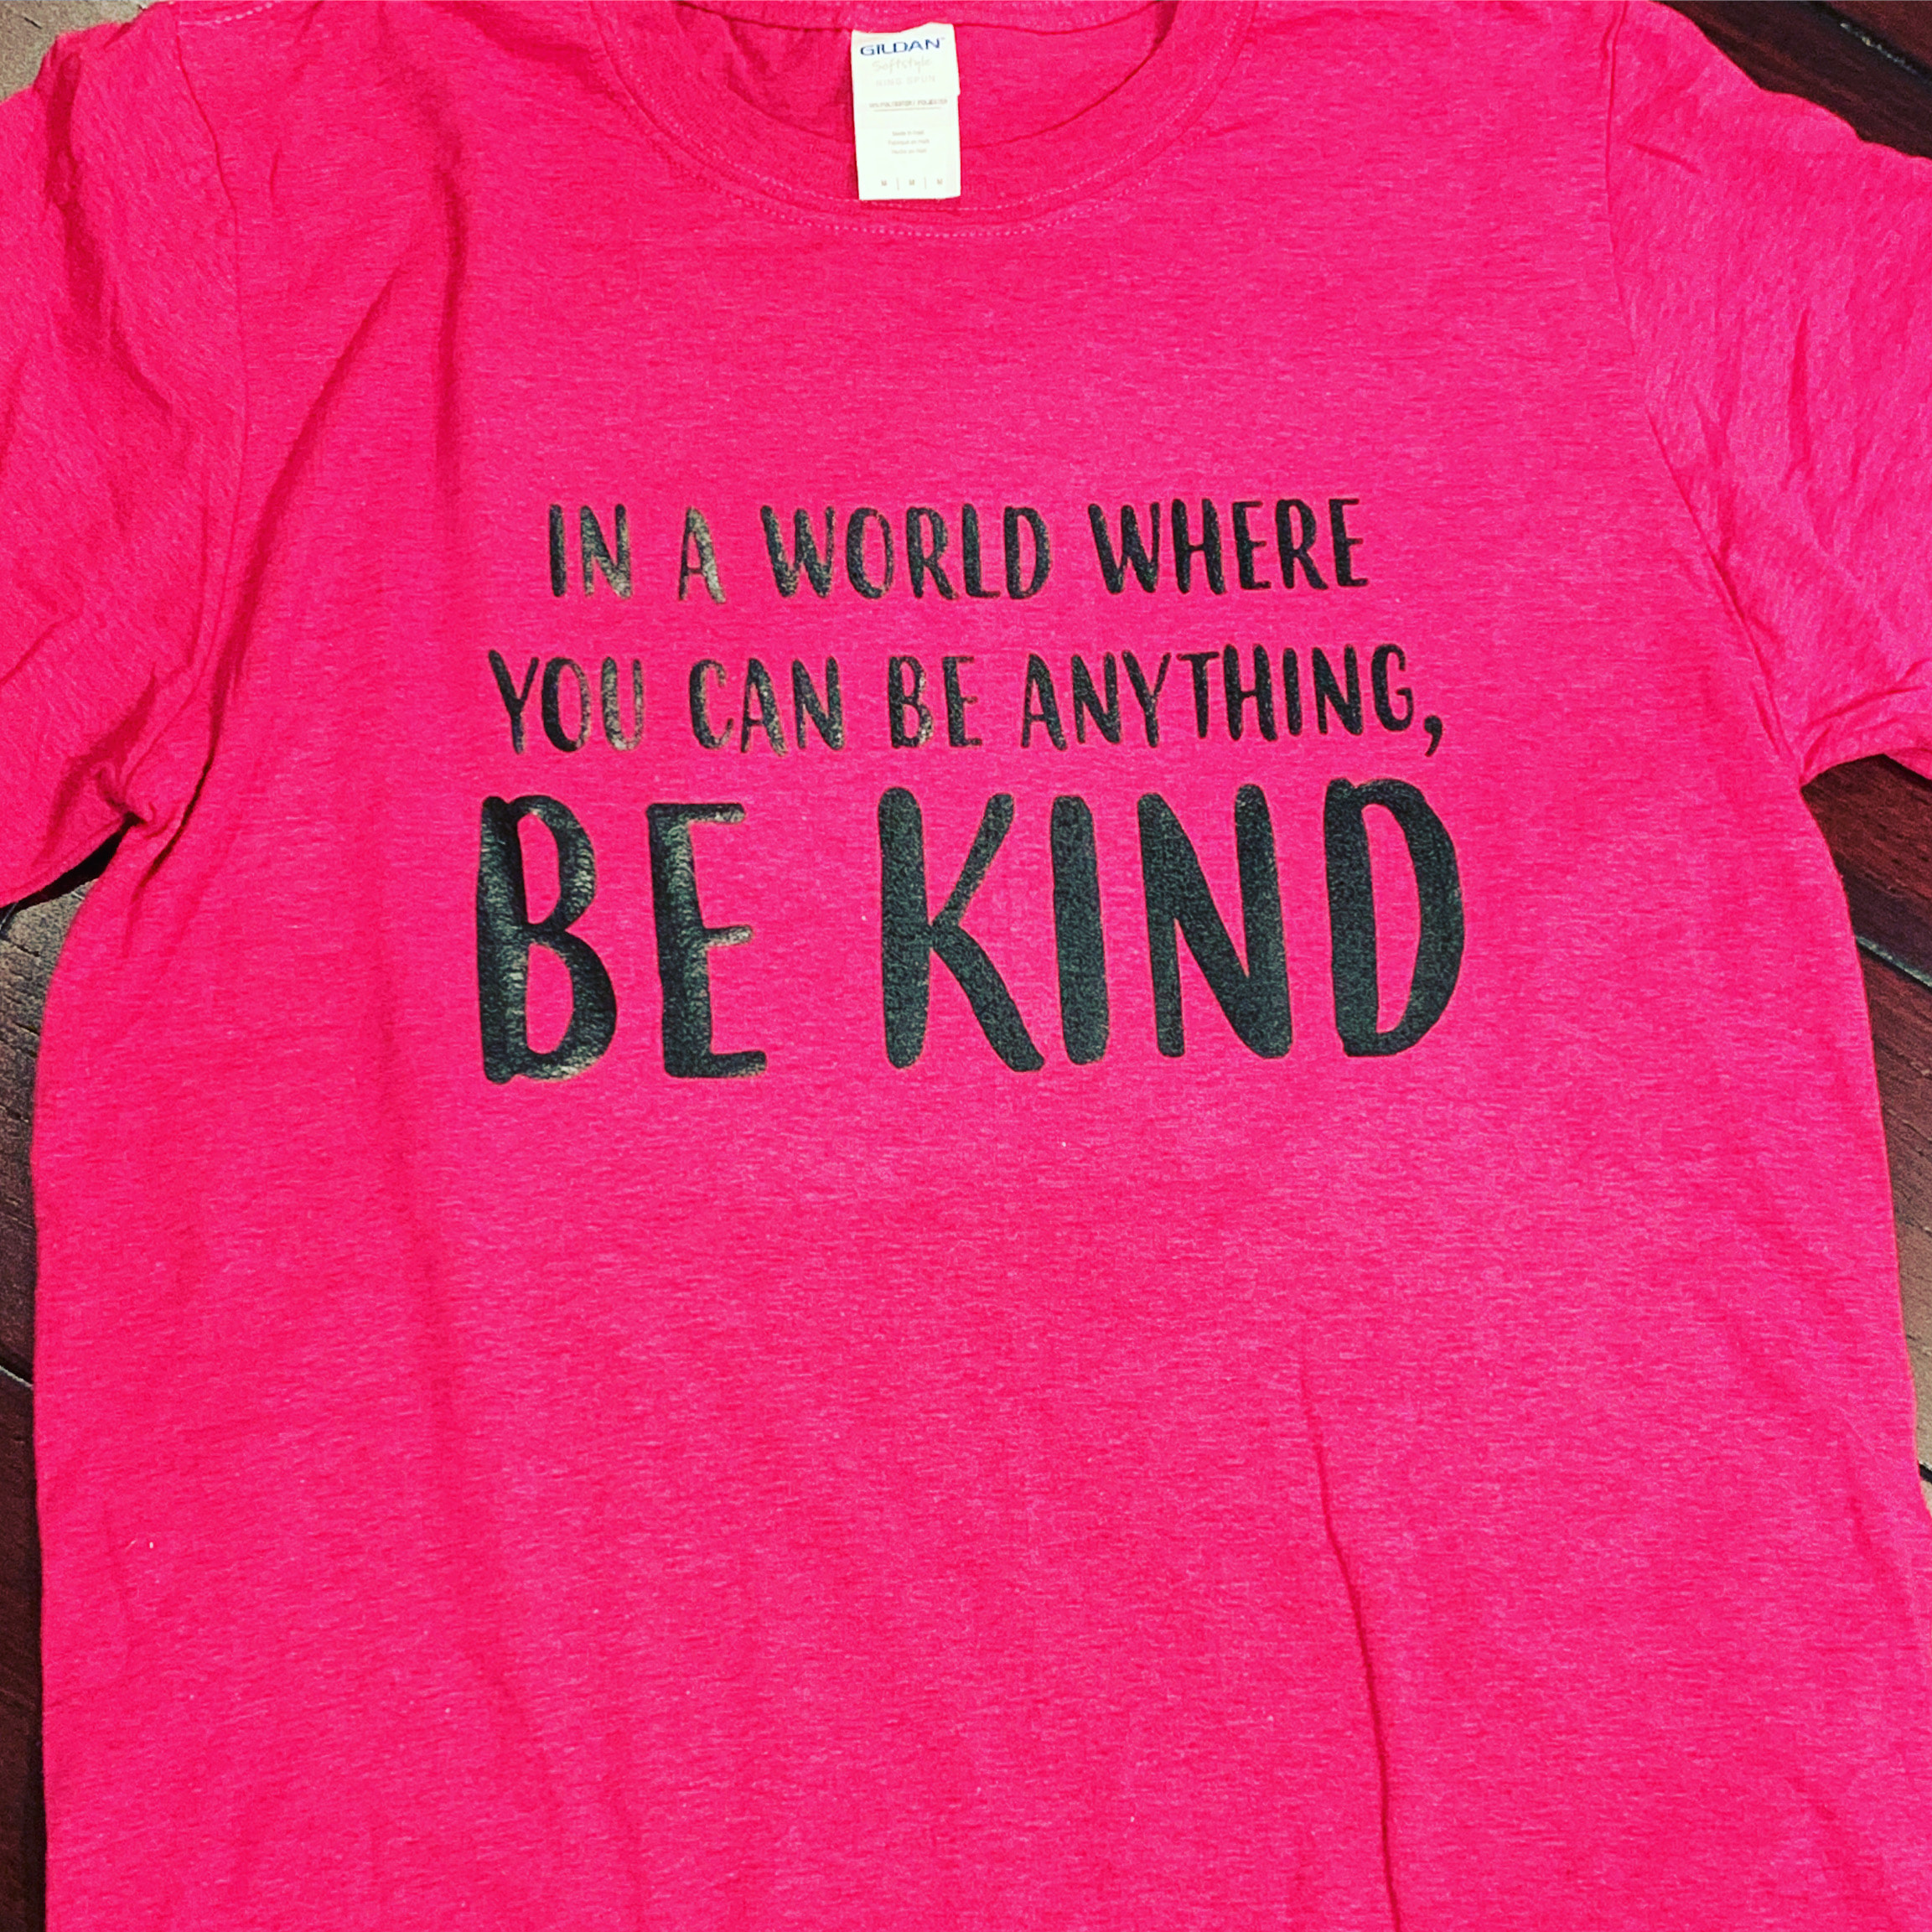 Be Kind Pink Shirt by Pulp Creations MD